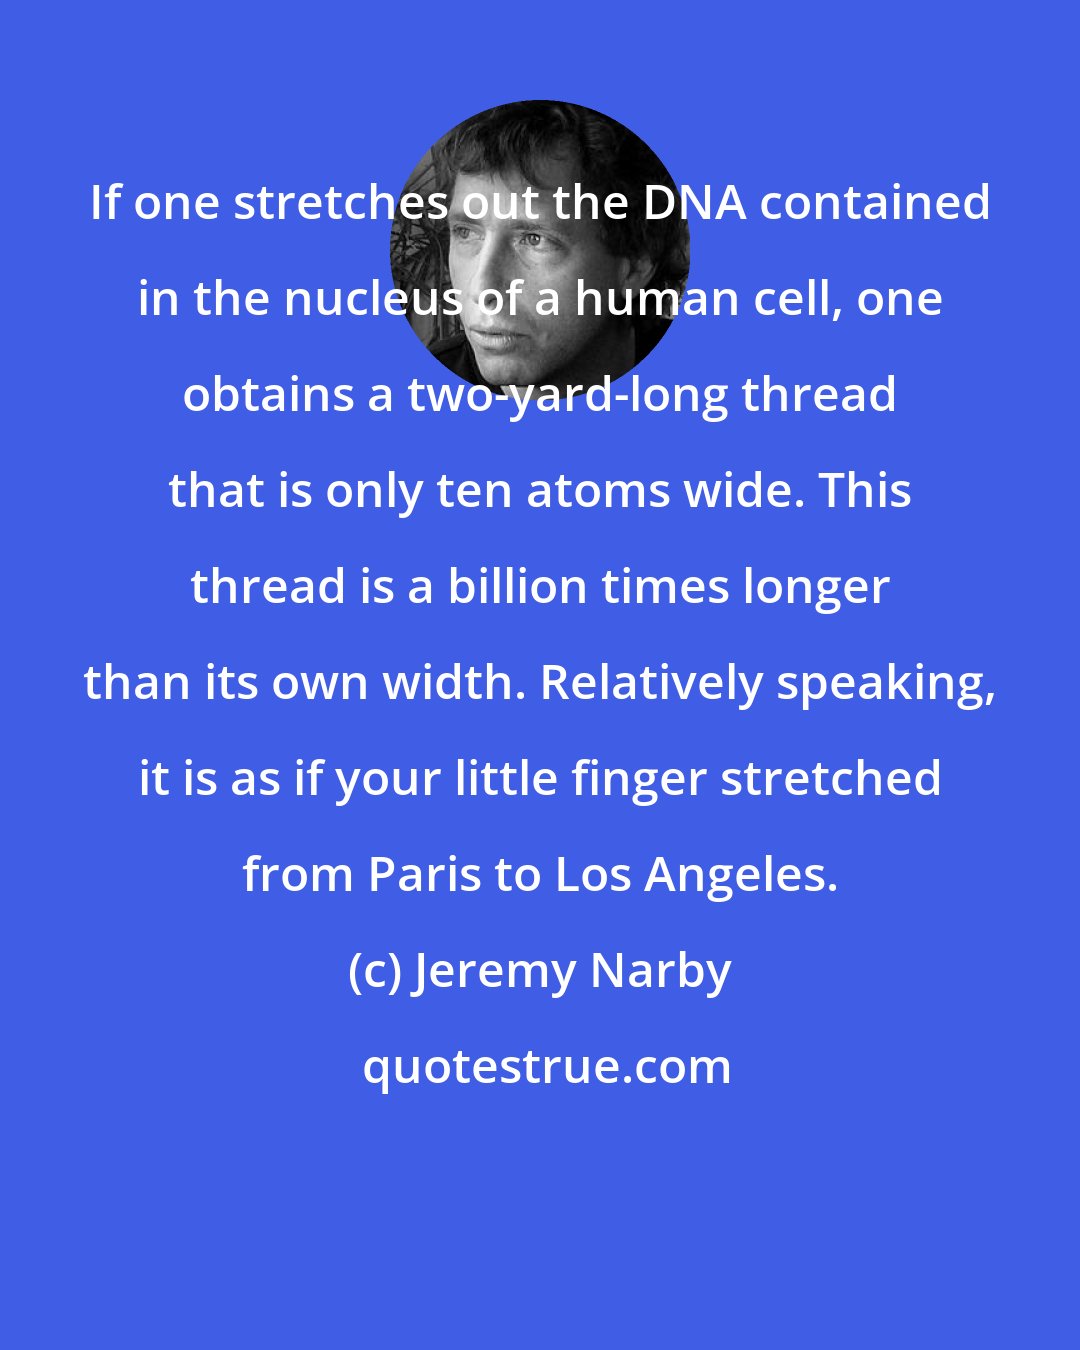 Jeremy Narby: If one stretches out the DNA contained in the nucleus of a human cell, one obtains a two-yard-long thread that is only ten atoms wide. This thread is a billion times longer than its own width. Relatively speaking, it is as if your little finger stretched from Paris to Los Angeles.